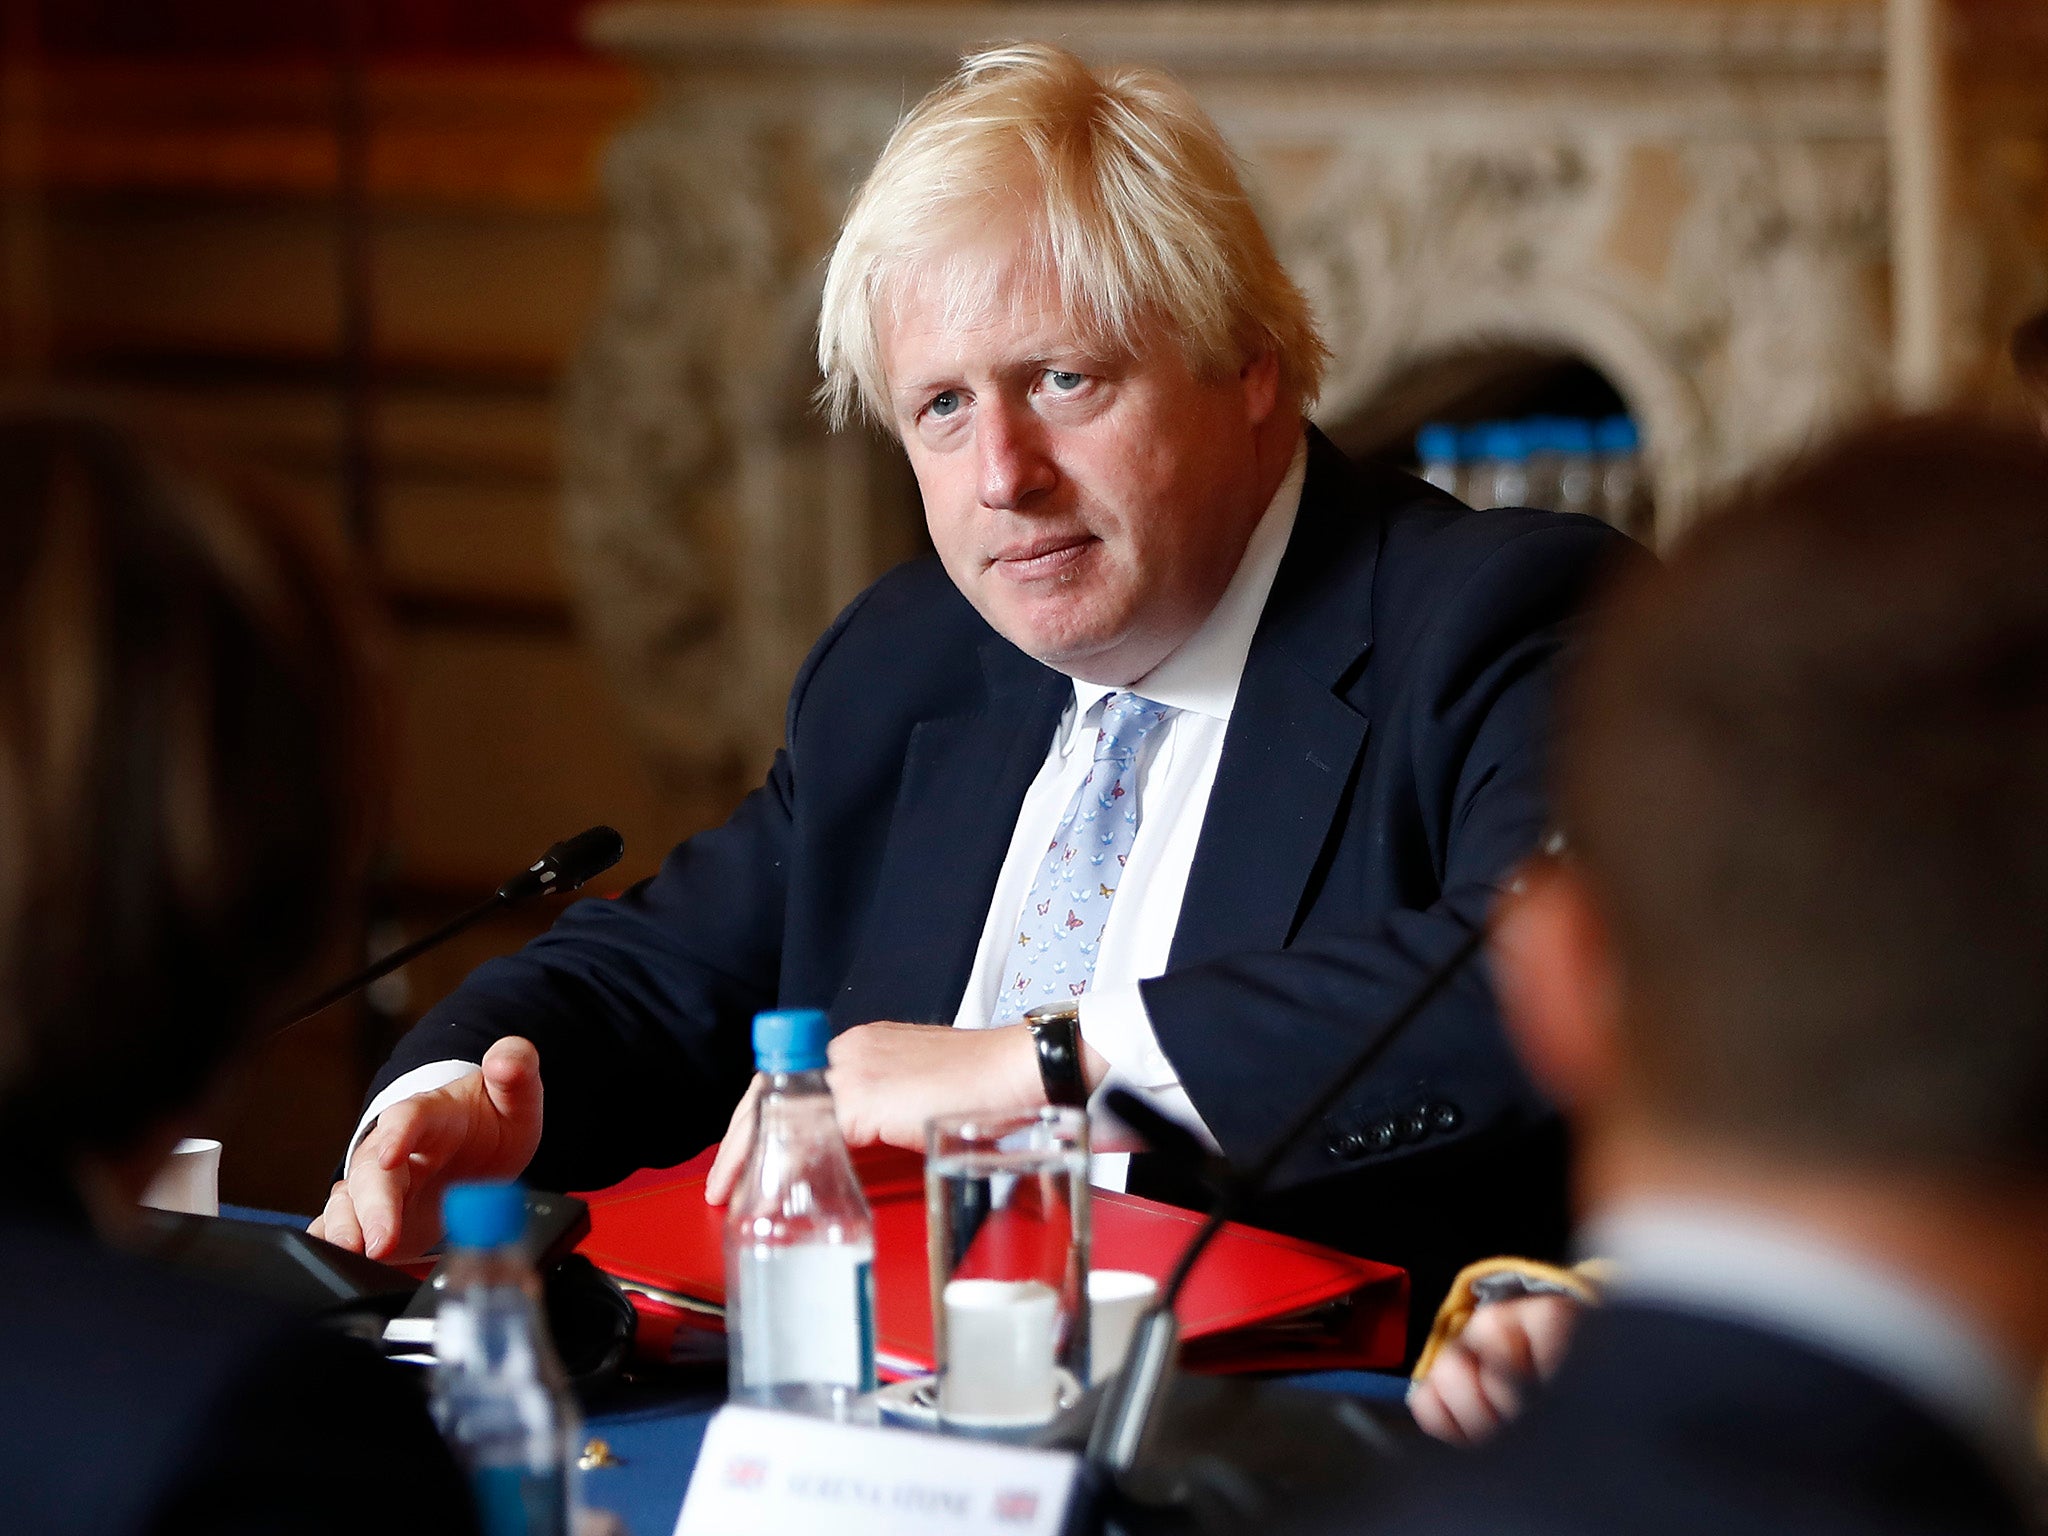 Boris Johnson says that Brexit will enable the UK to be "the greatest country on earth"